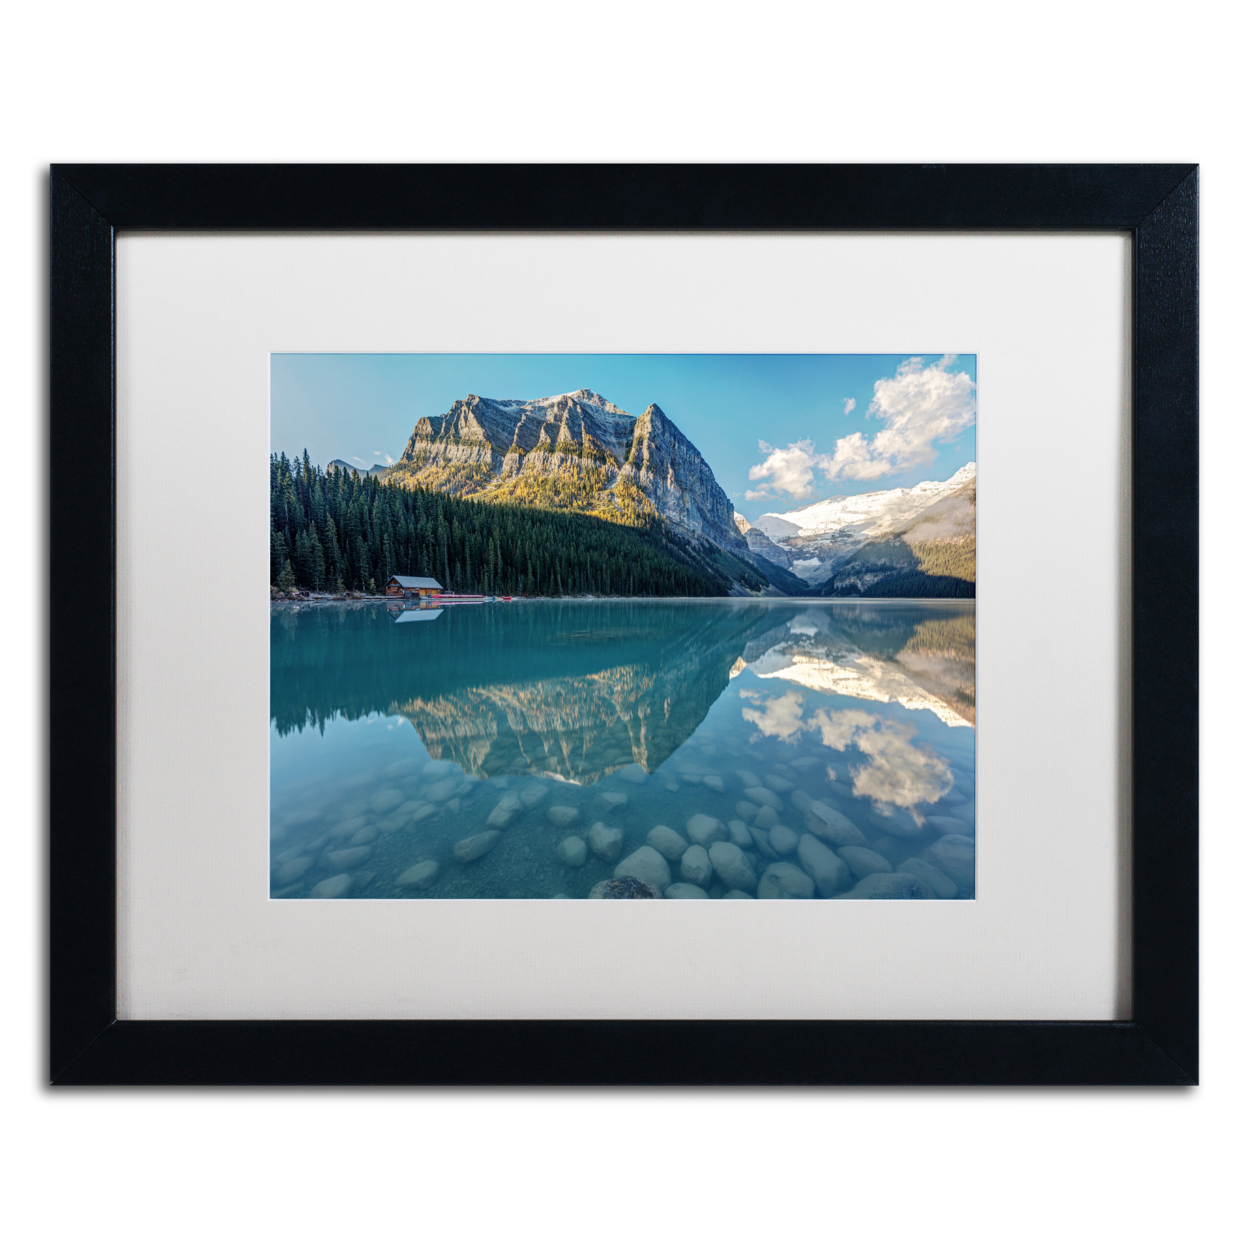 Pierre Leclerc 'Calm Lake Louise Morning' Black Wooden Framed Art 18 X 22 Inches